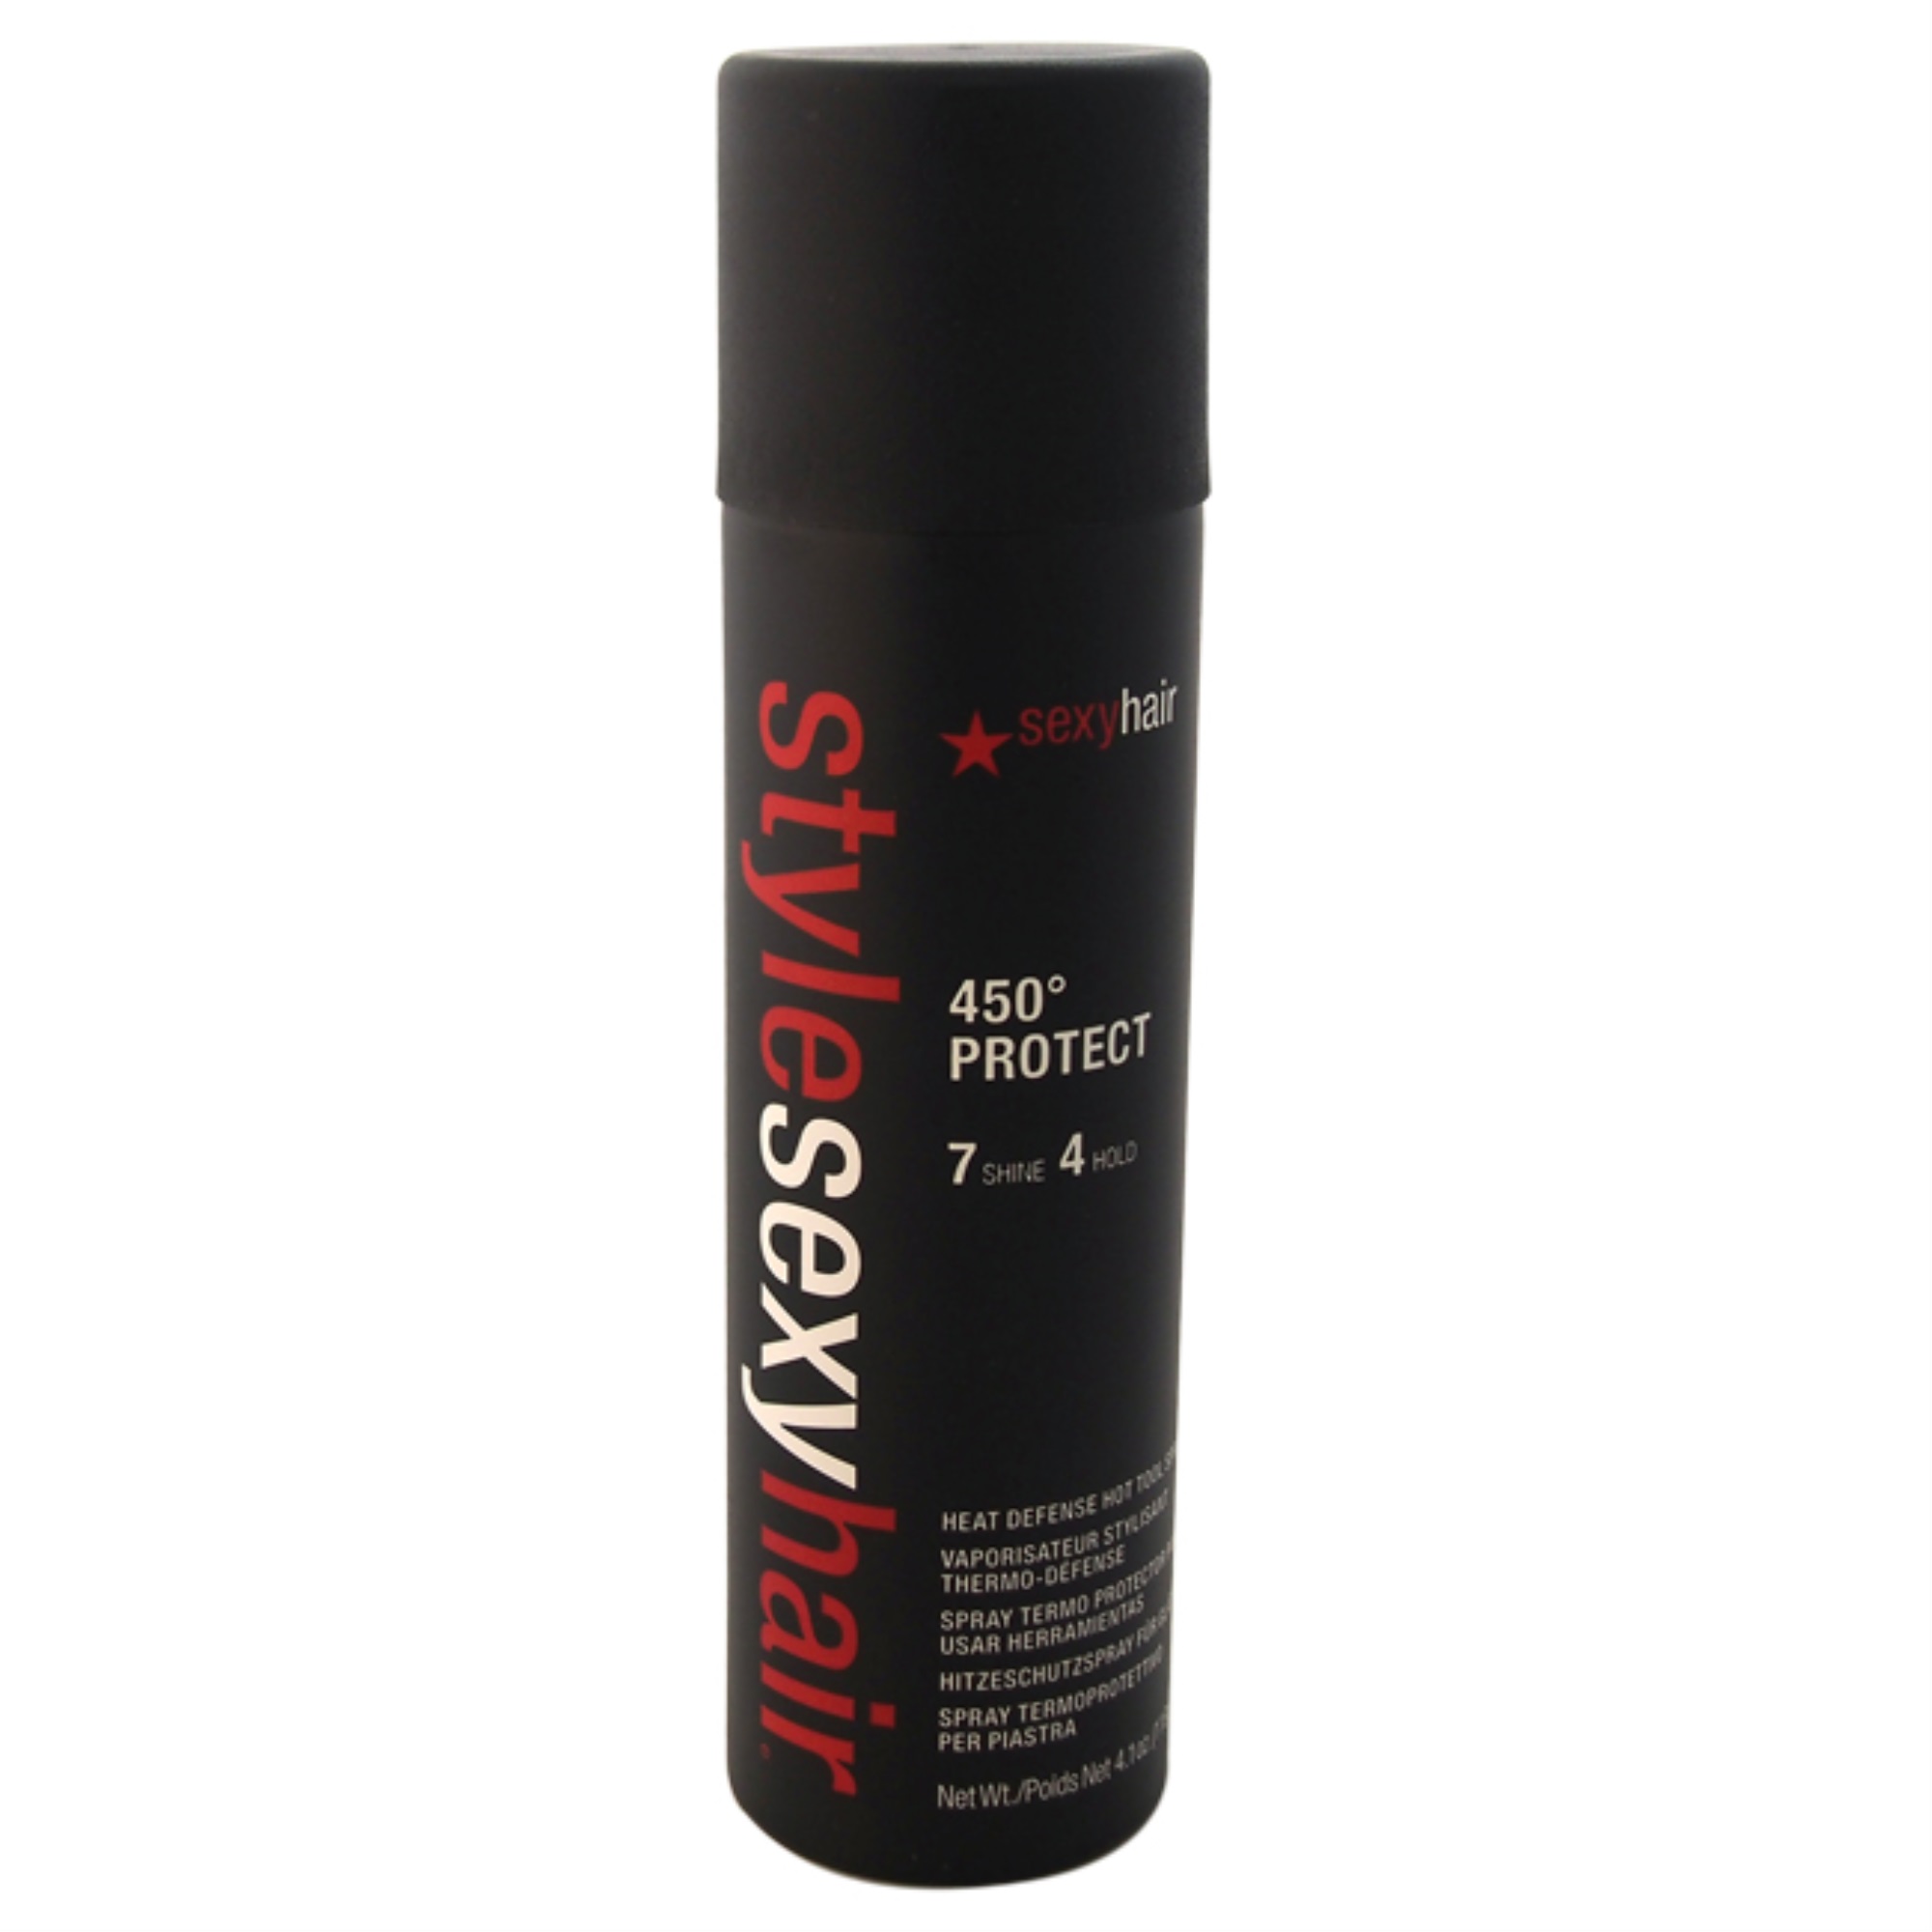 Style Sexy Hair 450 Protect - Heat Defense Hot Tool Spray by Sexy Hair for Unisex - 4.1 oz Hairspray - image 1 of 2